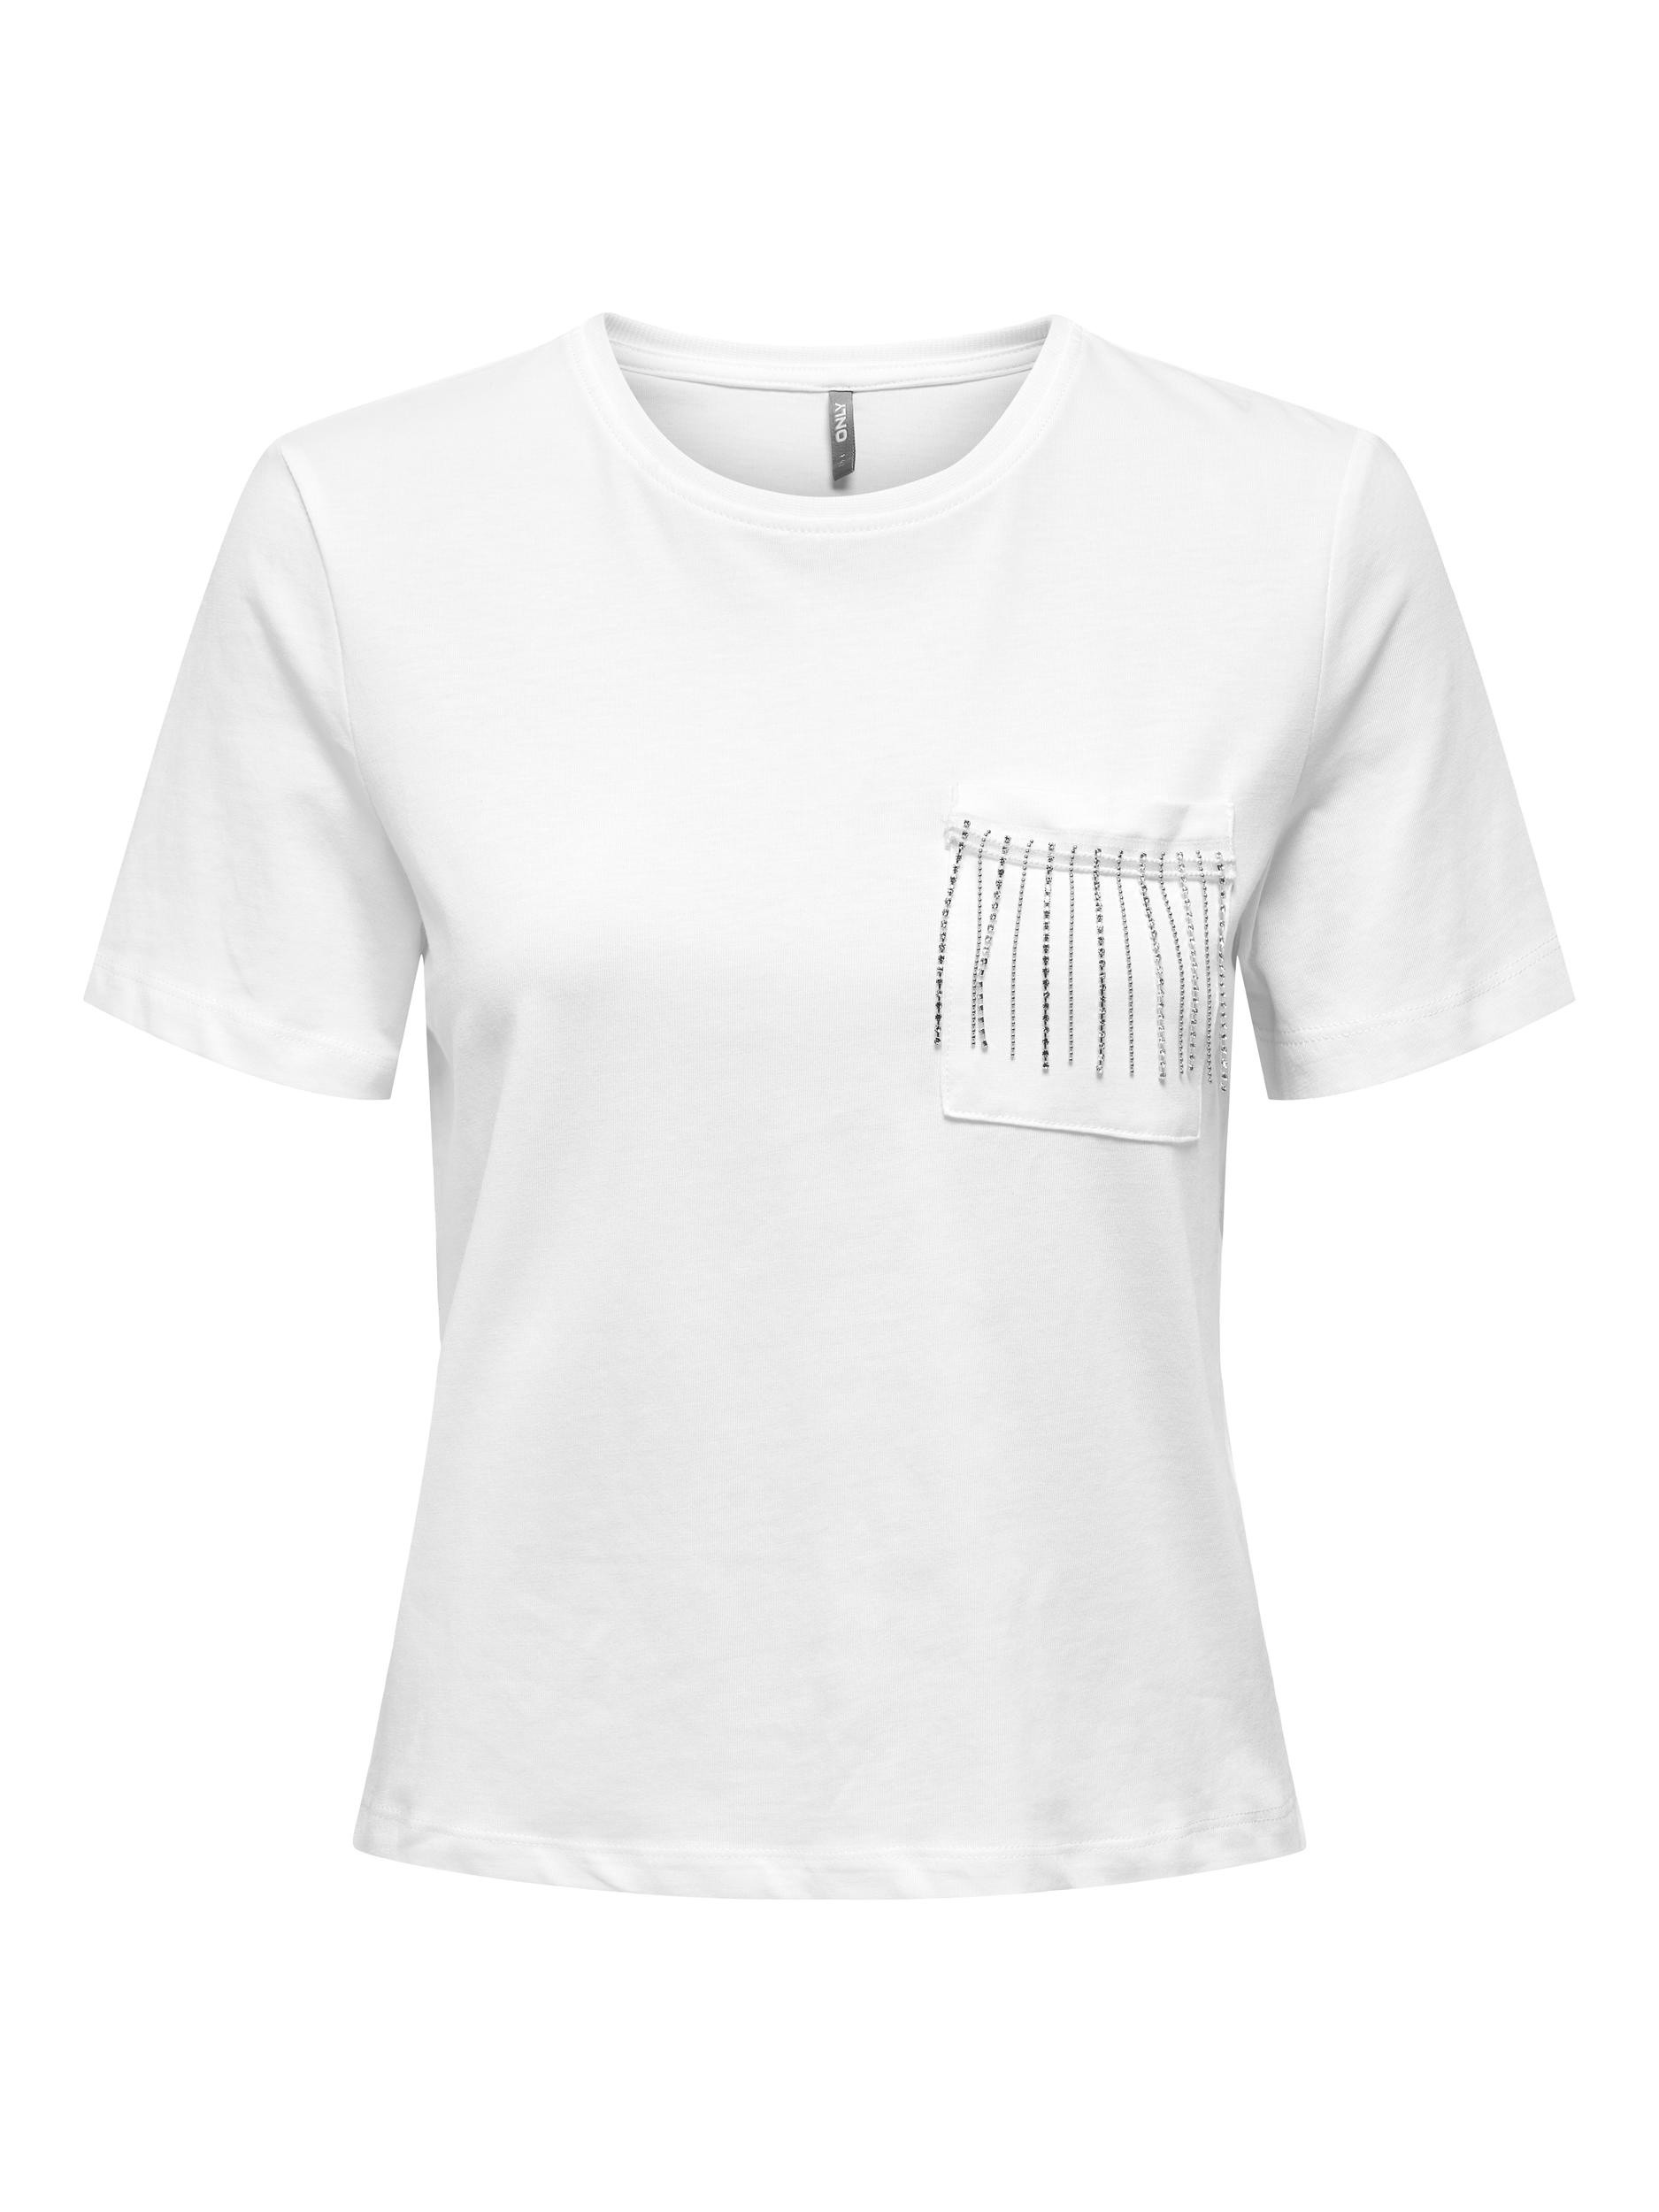 Only -Cotton T-shirt with rhinestones, White, large image number 0